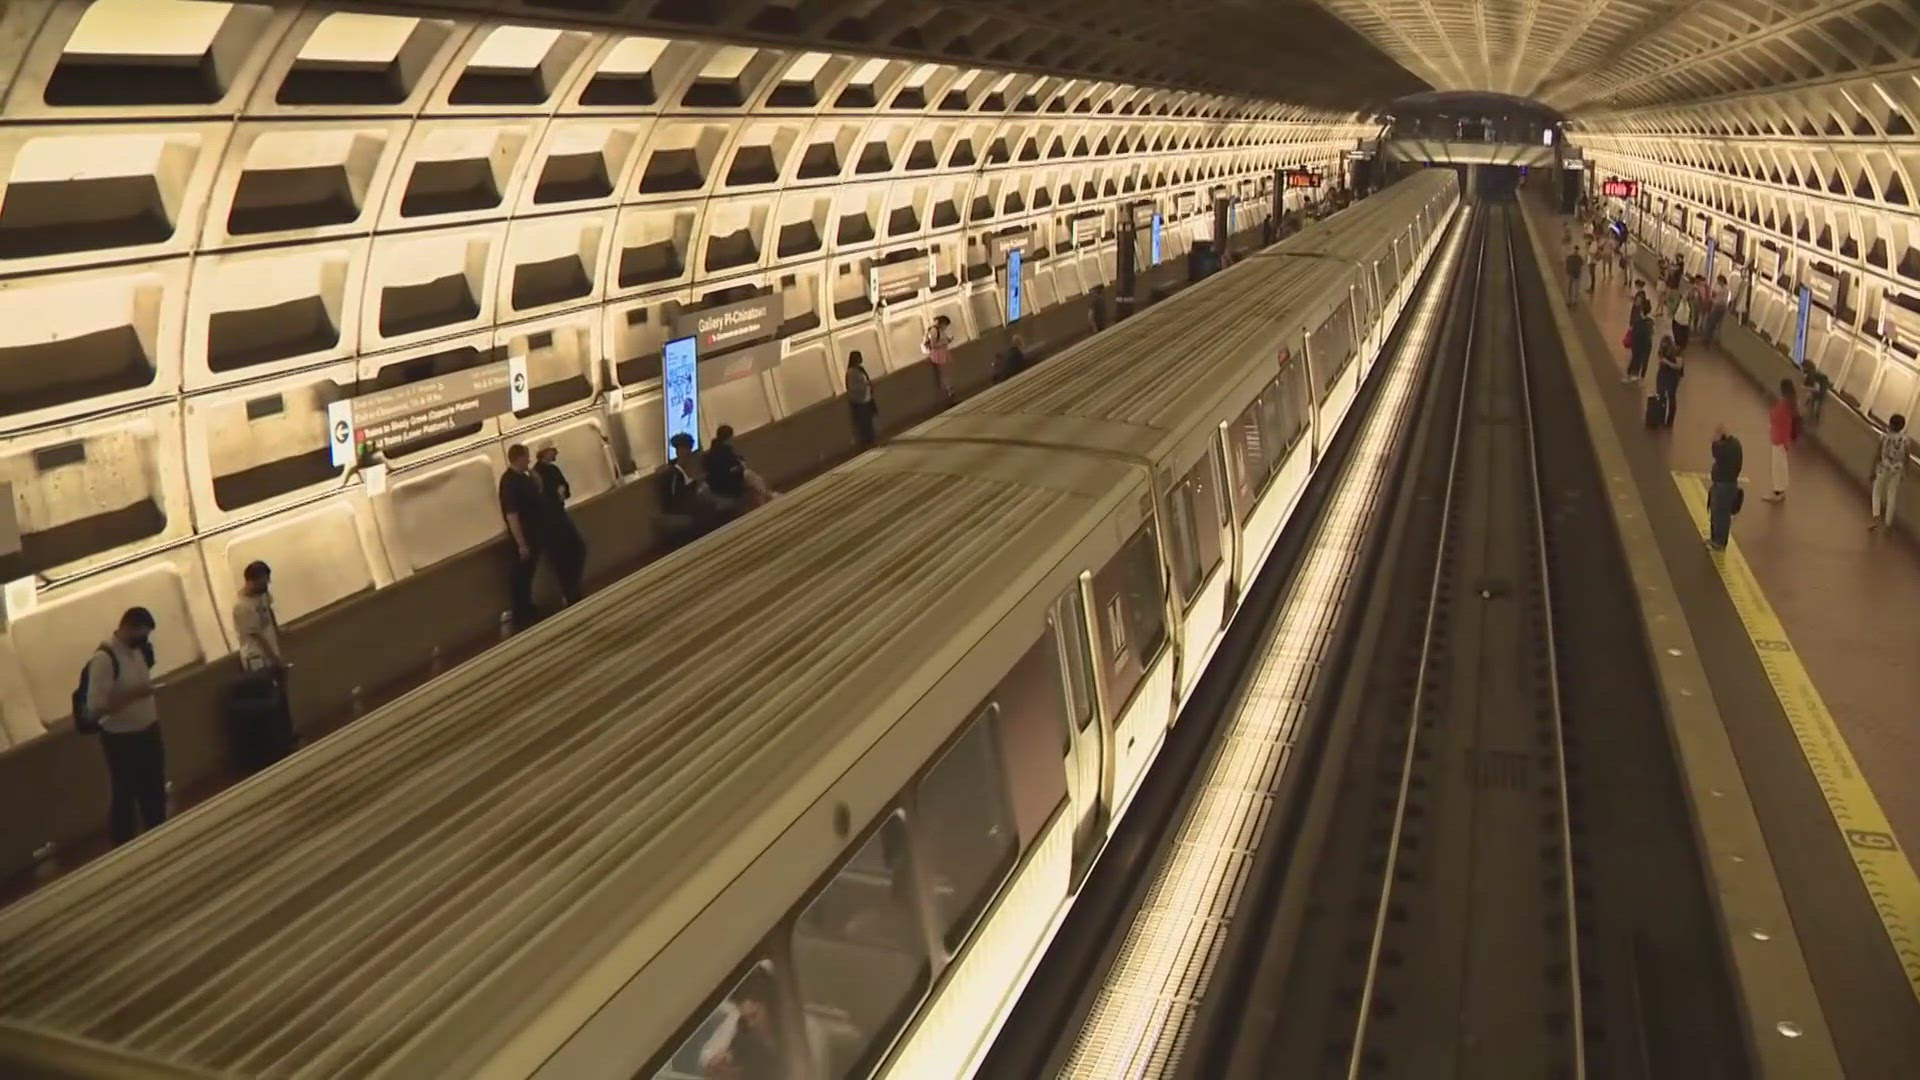 The Washington Metrorail Safety Commission highlighted some glaring issues with program.